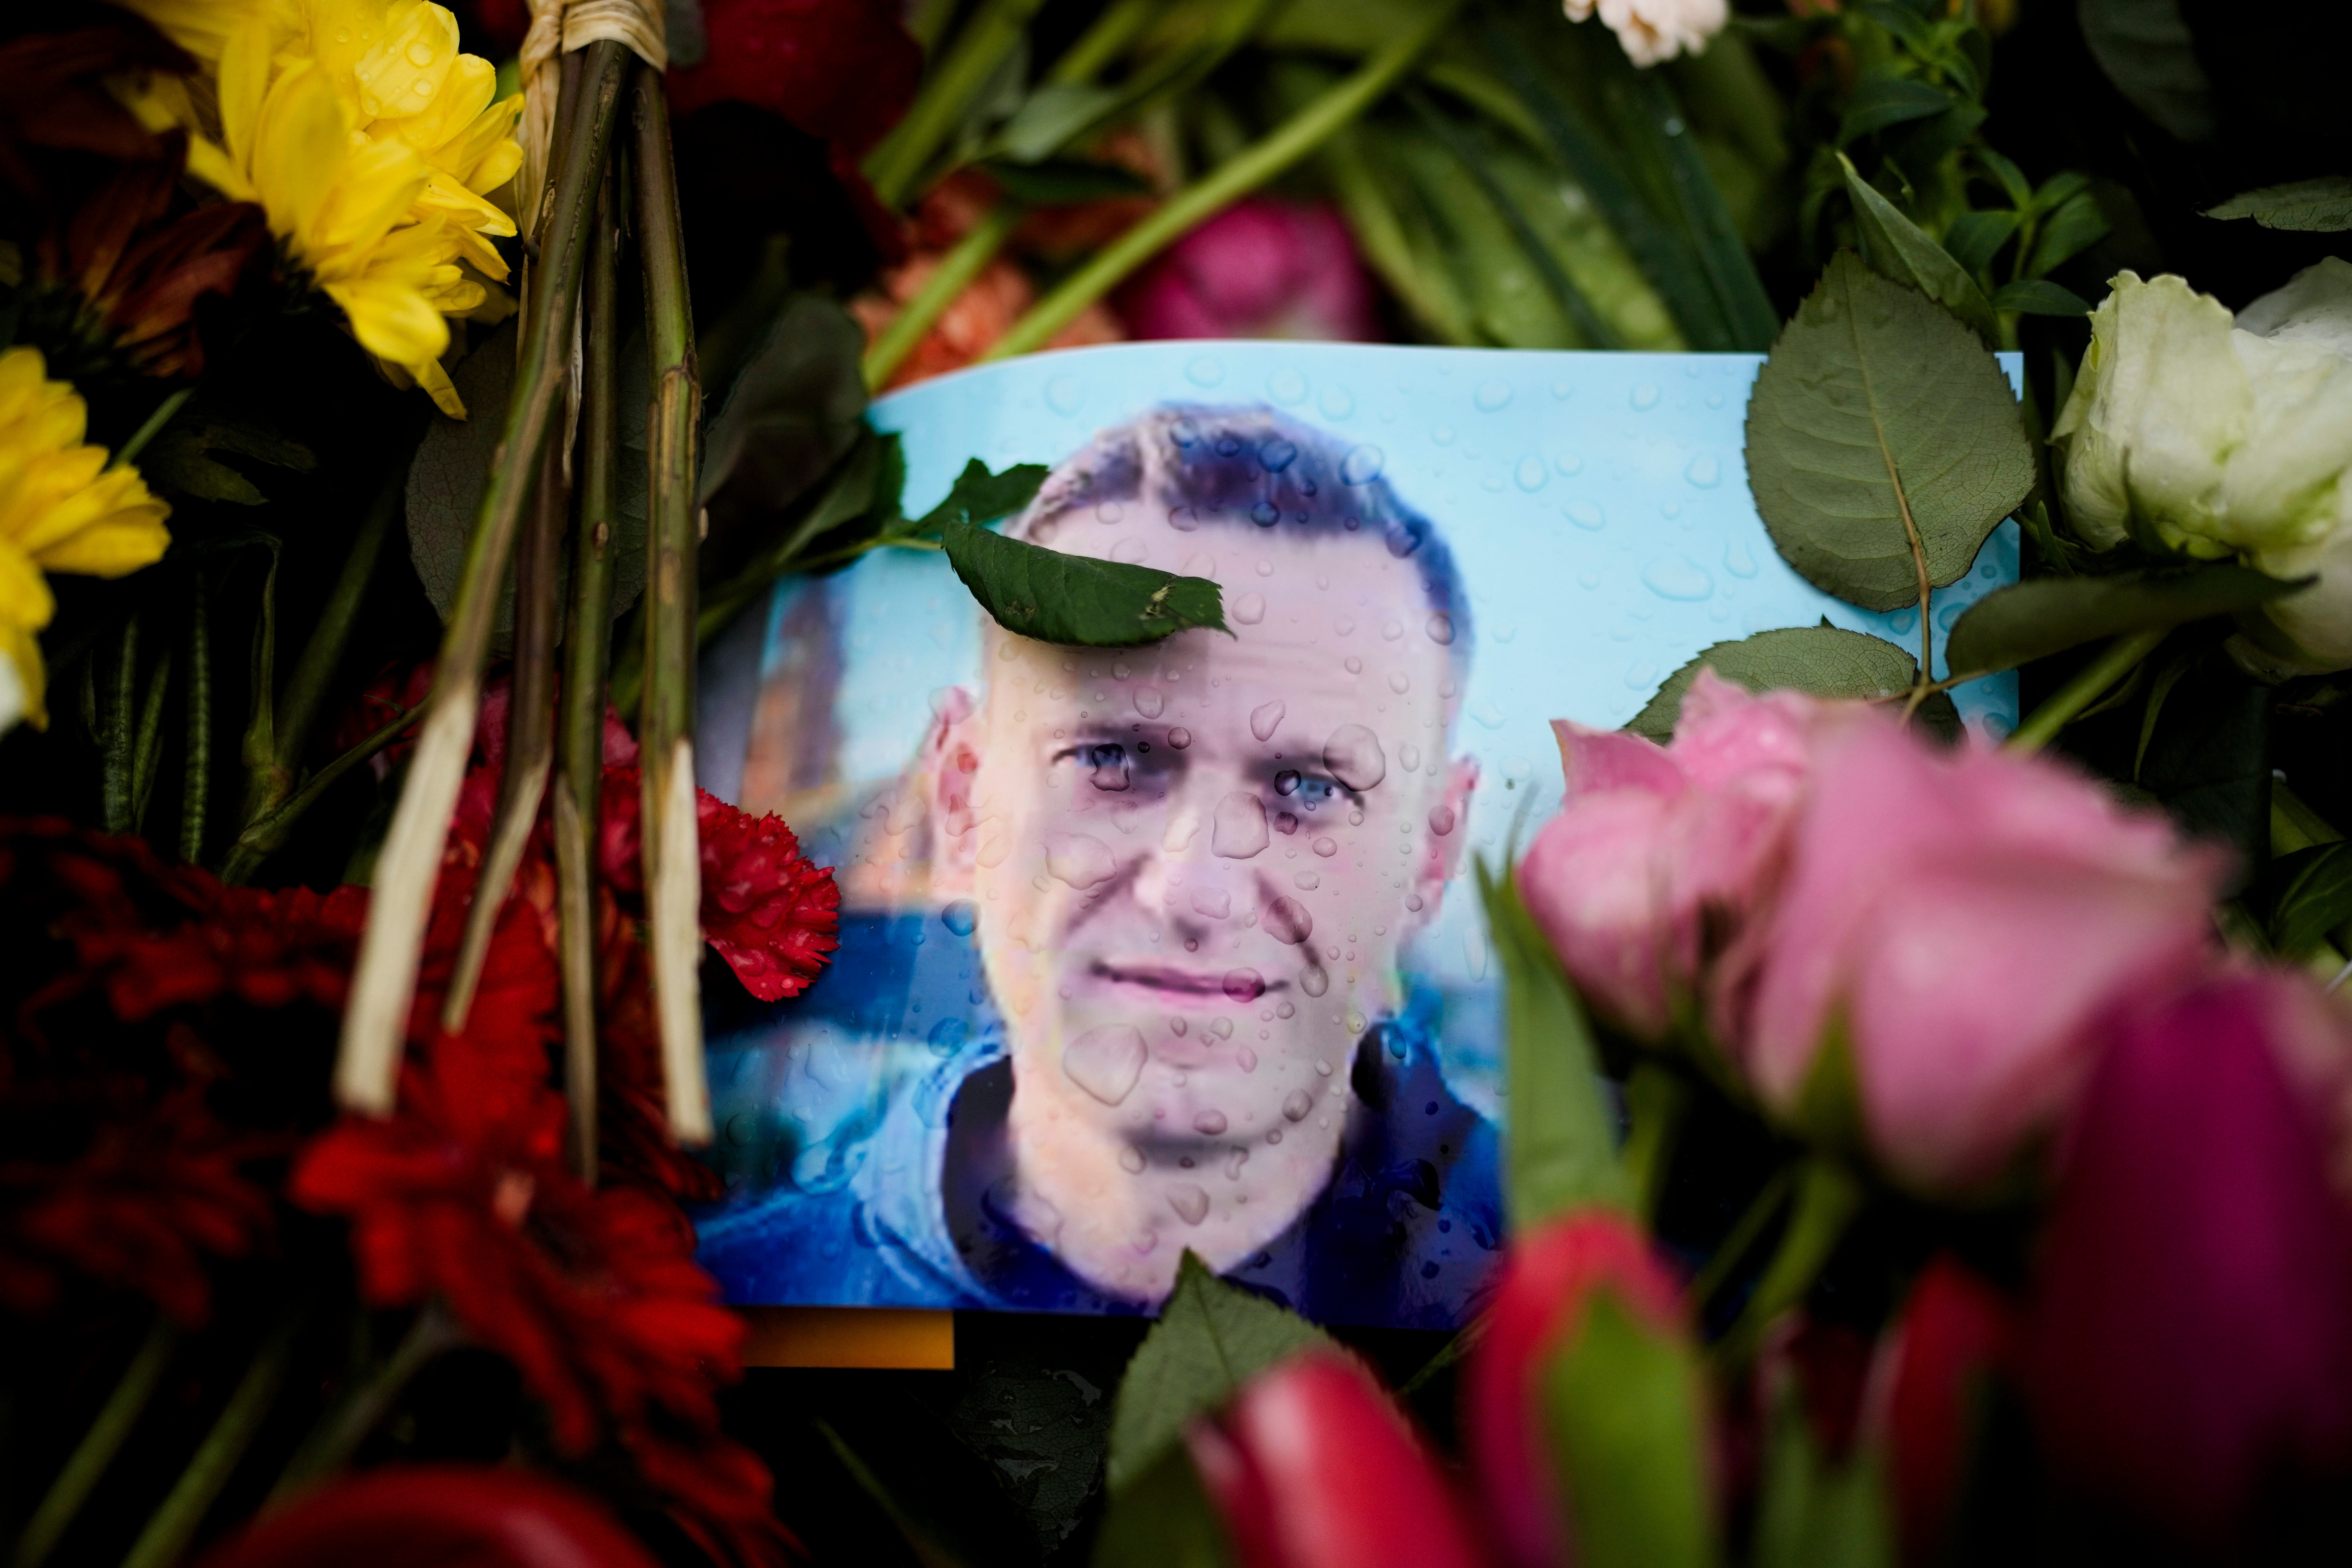 Russian opposition leader Alexei Navalny’s body finally handed over to his mother